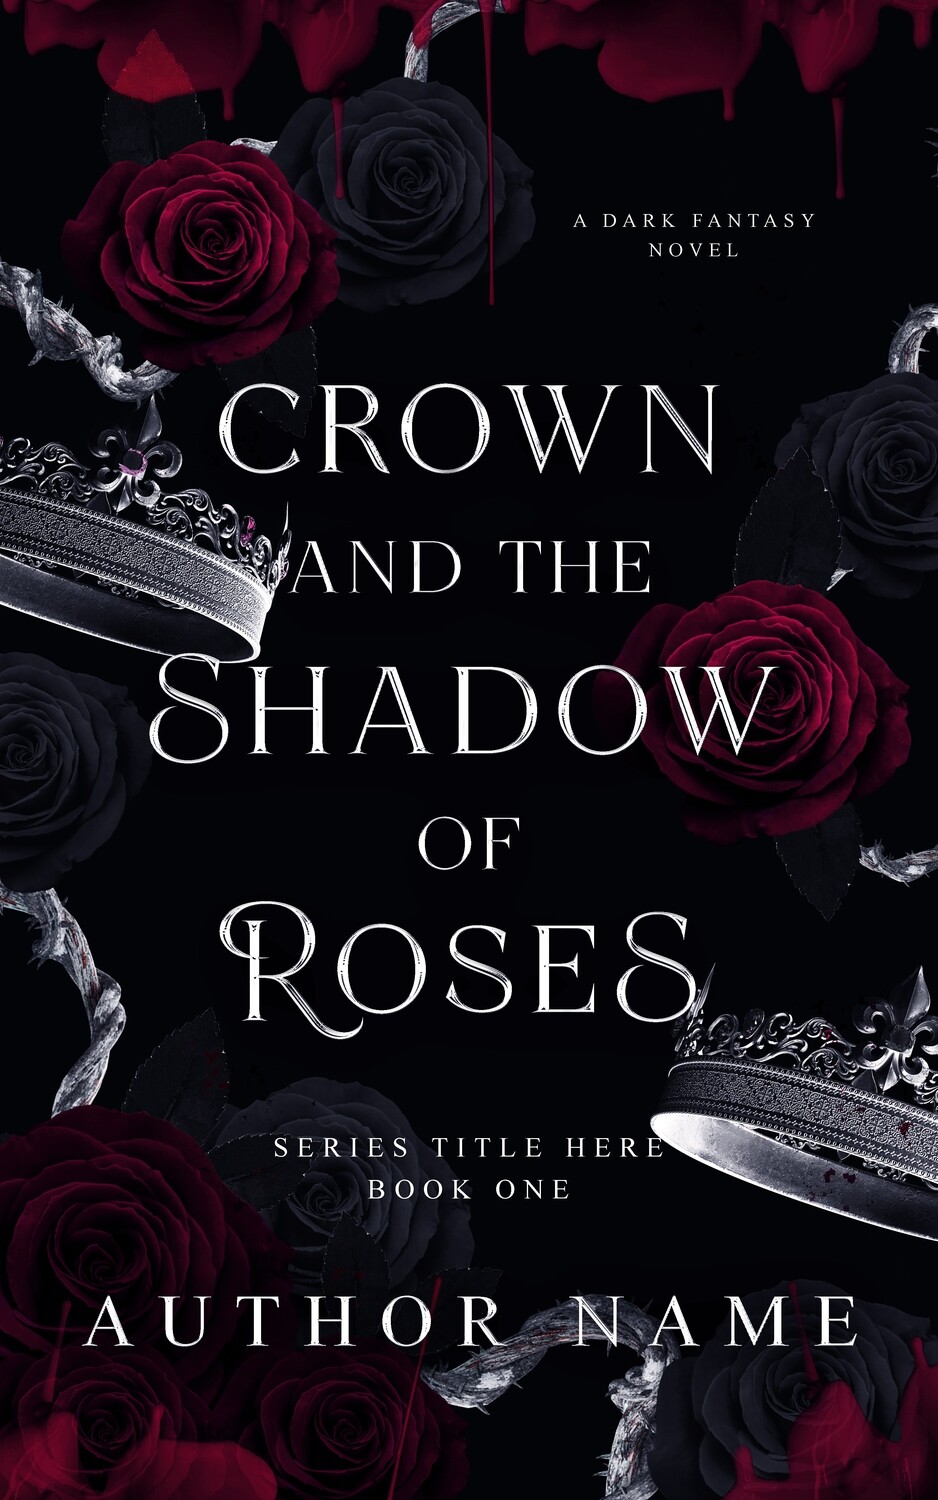 CROWN AND THE SHADOW OF ROSES